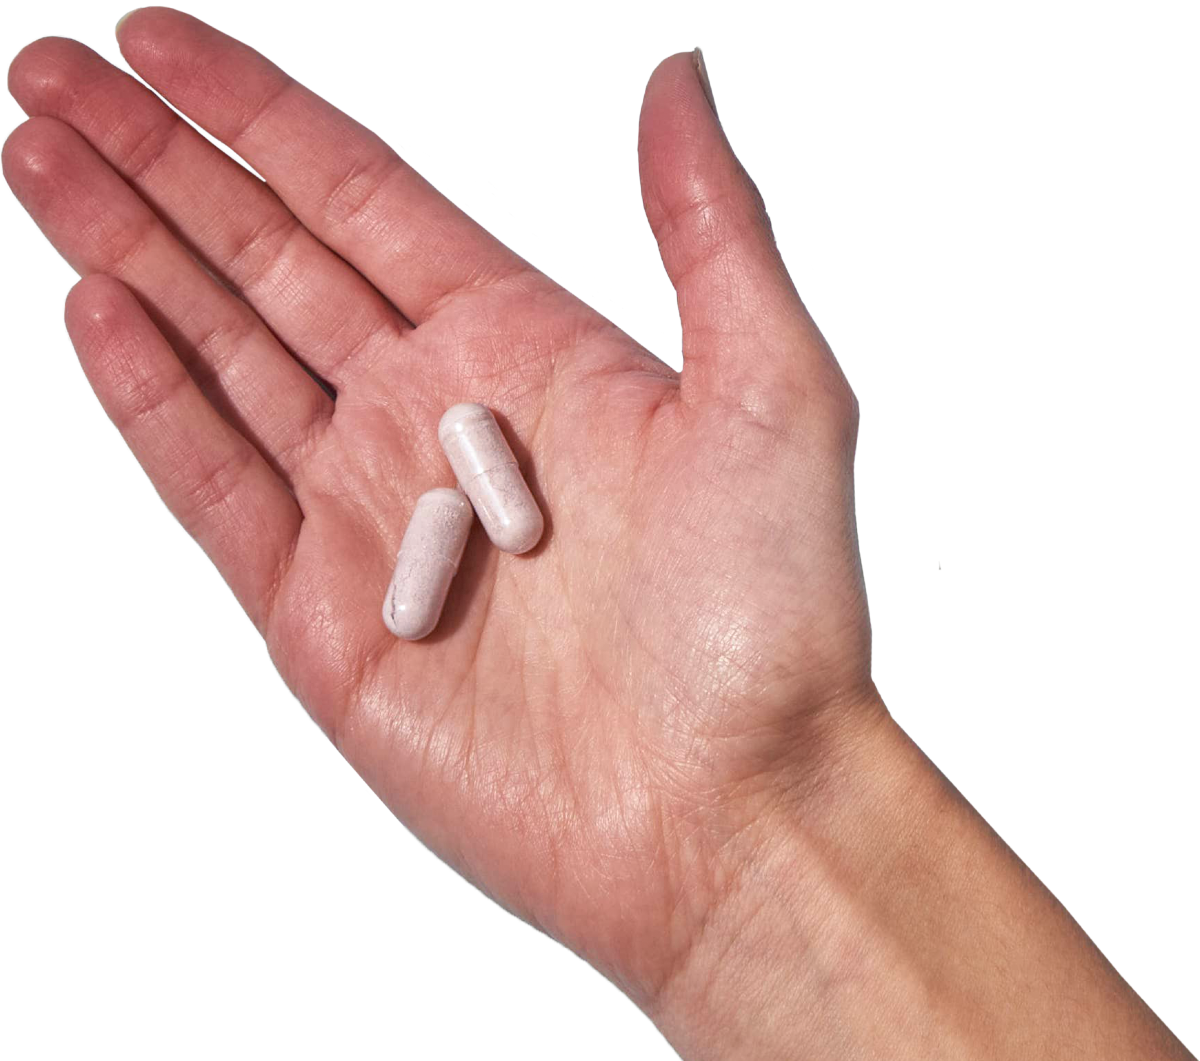 image of a hand holding 2 Performance Lab® Sleep capsules